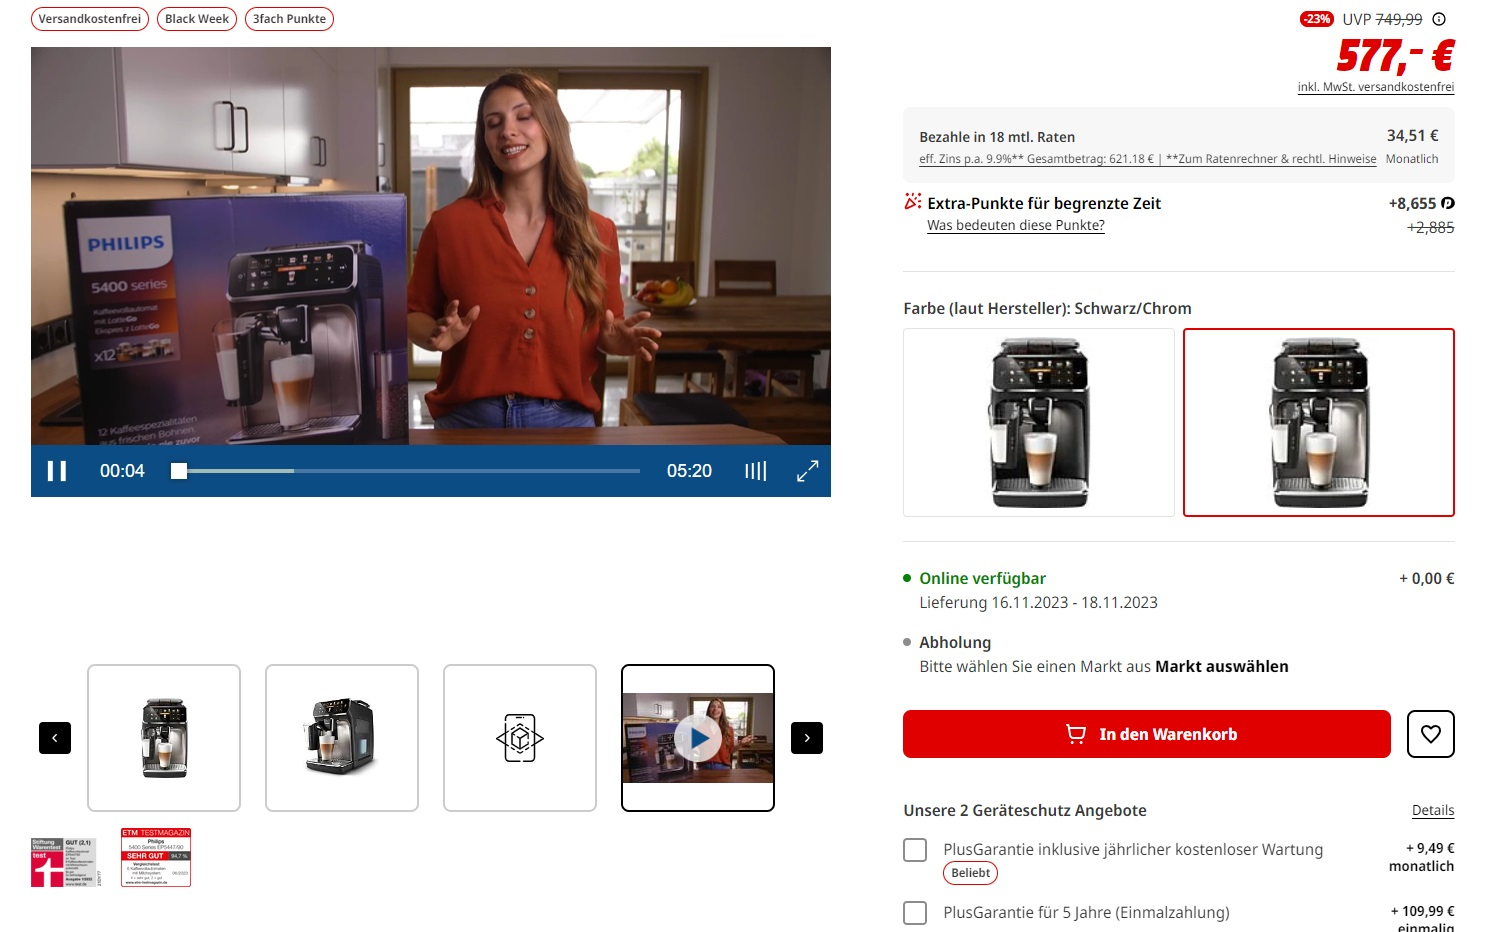 DemoUp Cliplister syndicating product videos to a retailer's product pages.